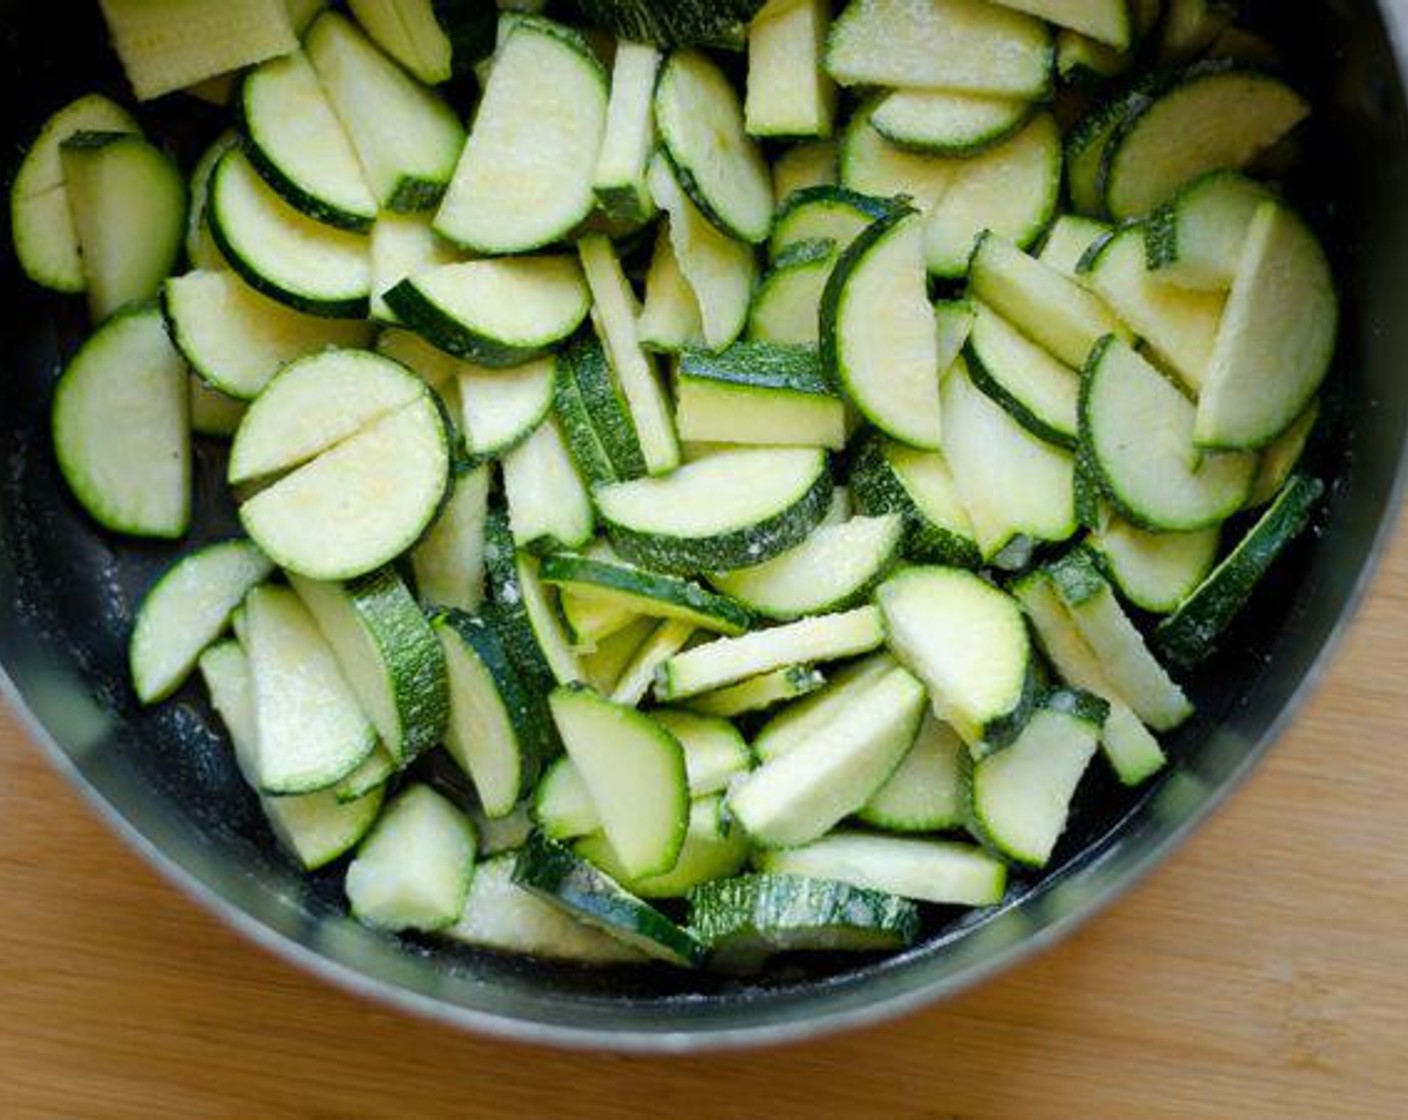 step 1 In an uncovered saucepan, bring Zucchini (4 cups), juice from Lemons (2) and Caster Sugar (1/2 cup) to a simmer over medium heat. Cook about 15 minutes, until zucchini is soft and some of the juice has reduced down.